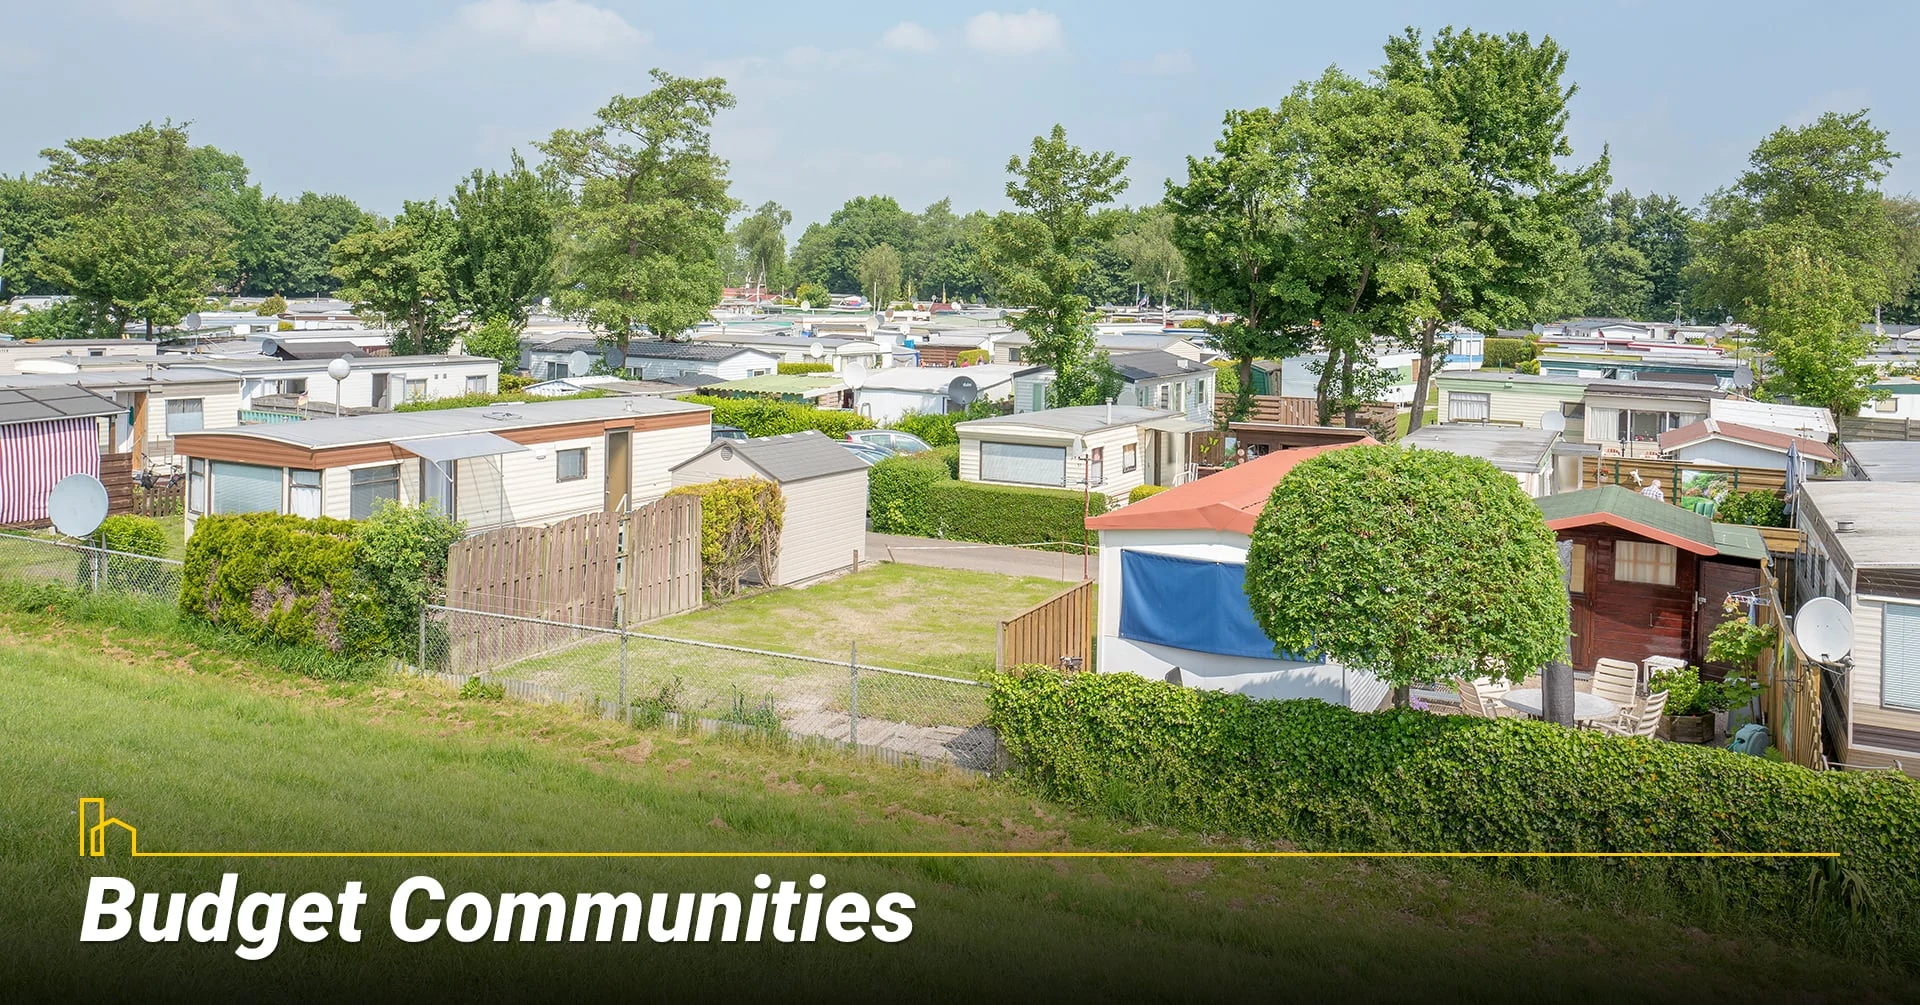 Budget Communities, affordable mobile home communities